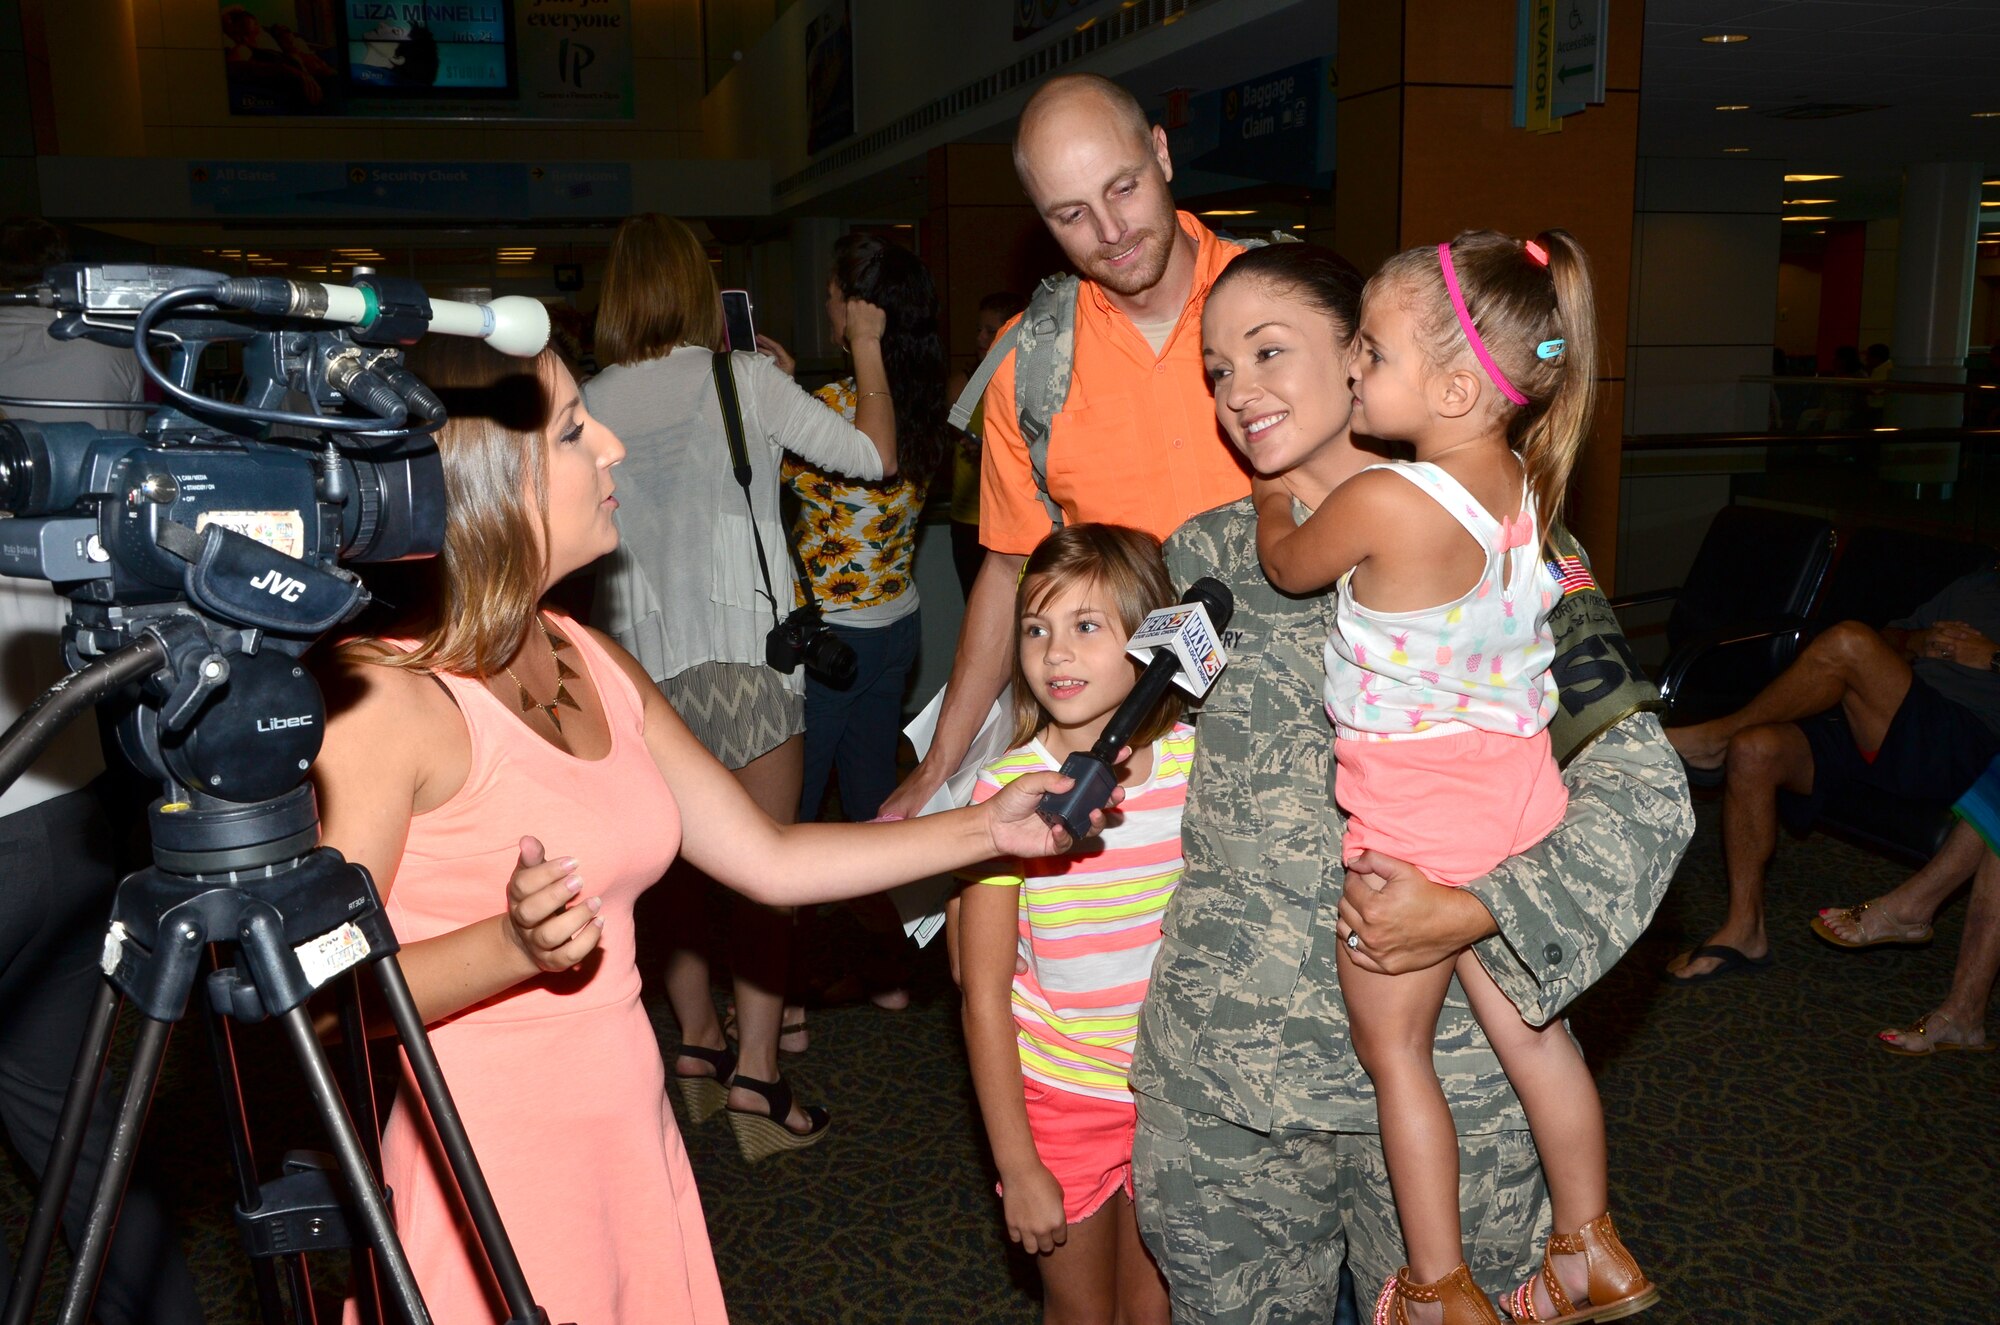 Tech. Sgt. Erica Dockert, a 403rd Wing Security Forces Squadron member, speaks to WXXV-TV reporter Kristen Durand about being separated from her family during a six-month deployment supporting the 405th Air Expeditionary Group in Southwest Asia. 

Dockert, rejoined her family at the Gulfport-Biloxi International Airport July 22.